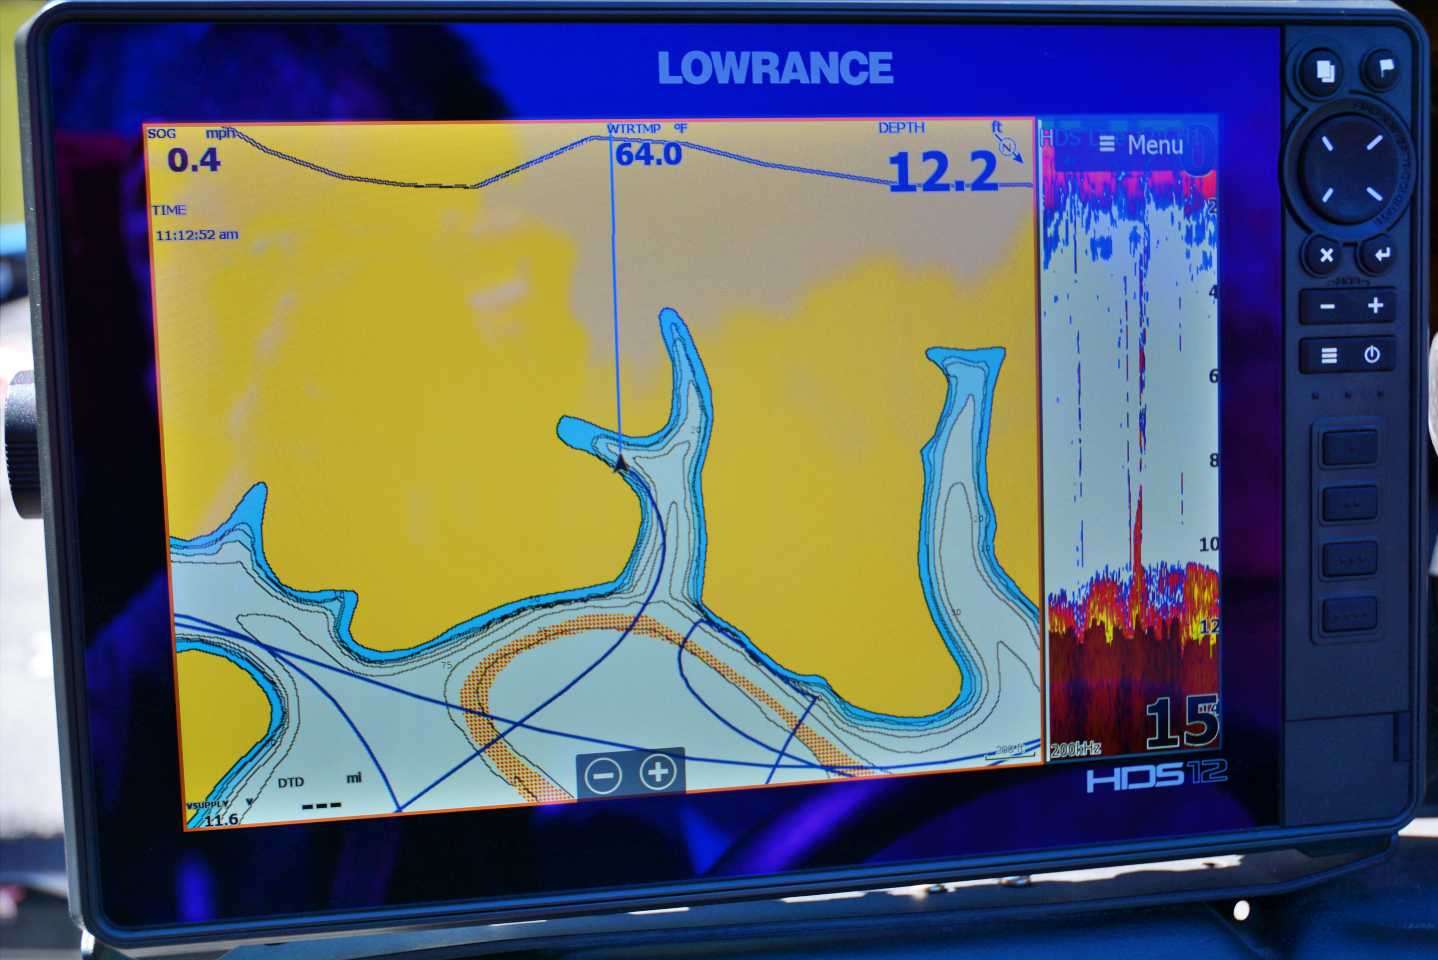 The Lowrance display illustrates a classic example of a pocket on Tims Ford. On the screen you can see his path into the pocket within the larger inundated hollow, located just off the main lake and near the river channel. Note the water temperature of 64 degrees.
